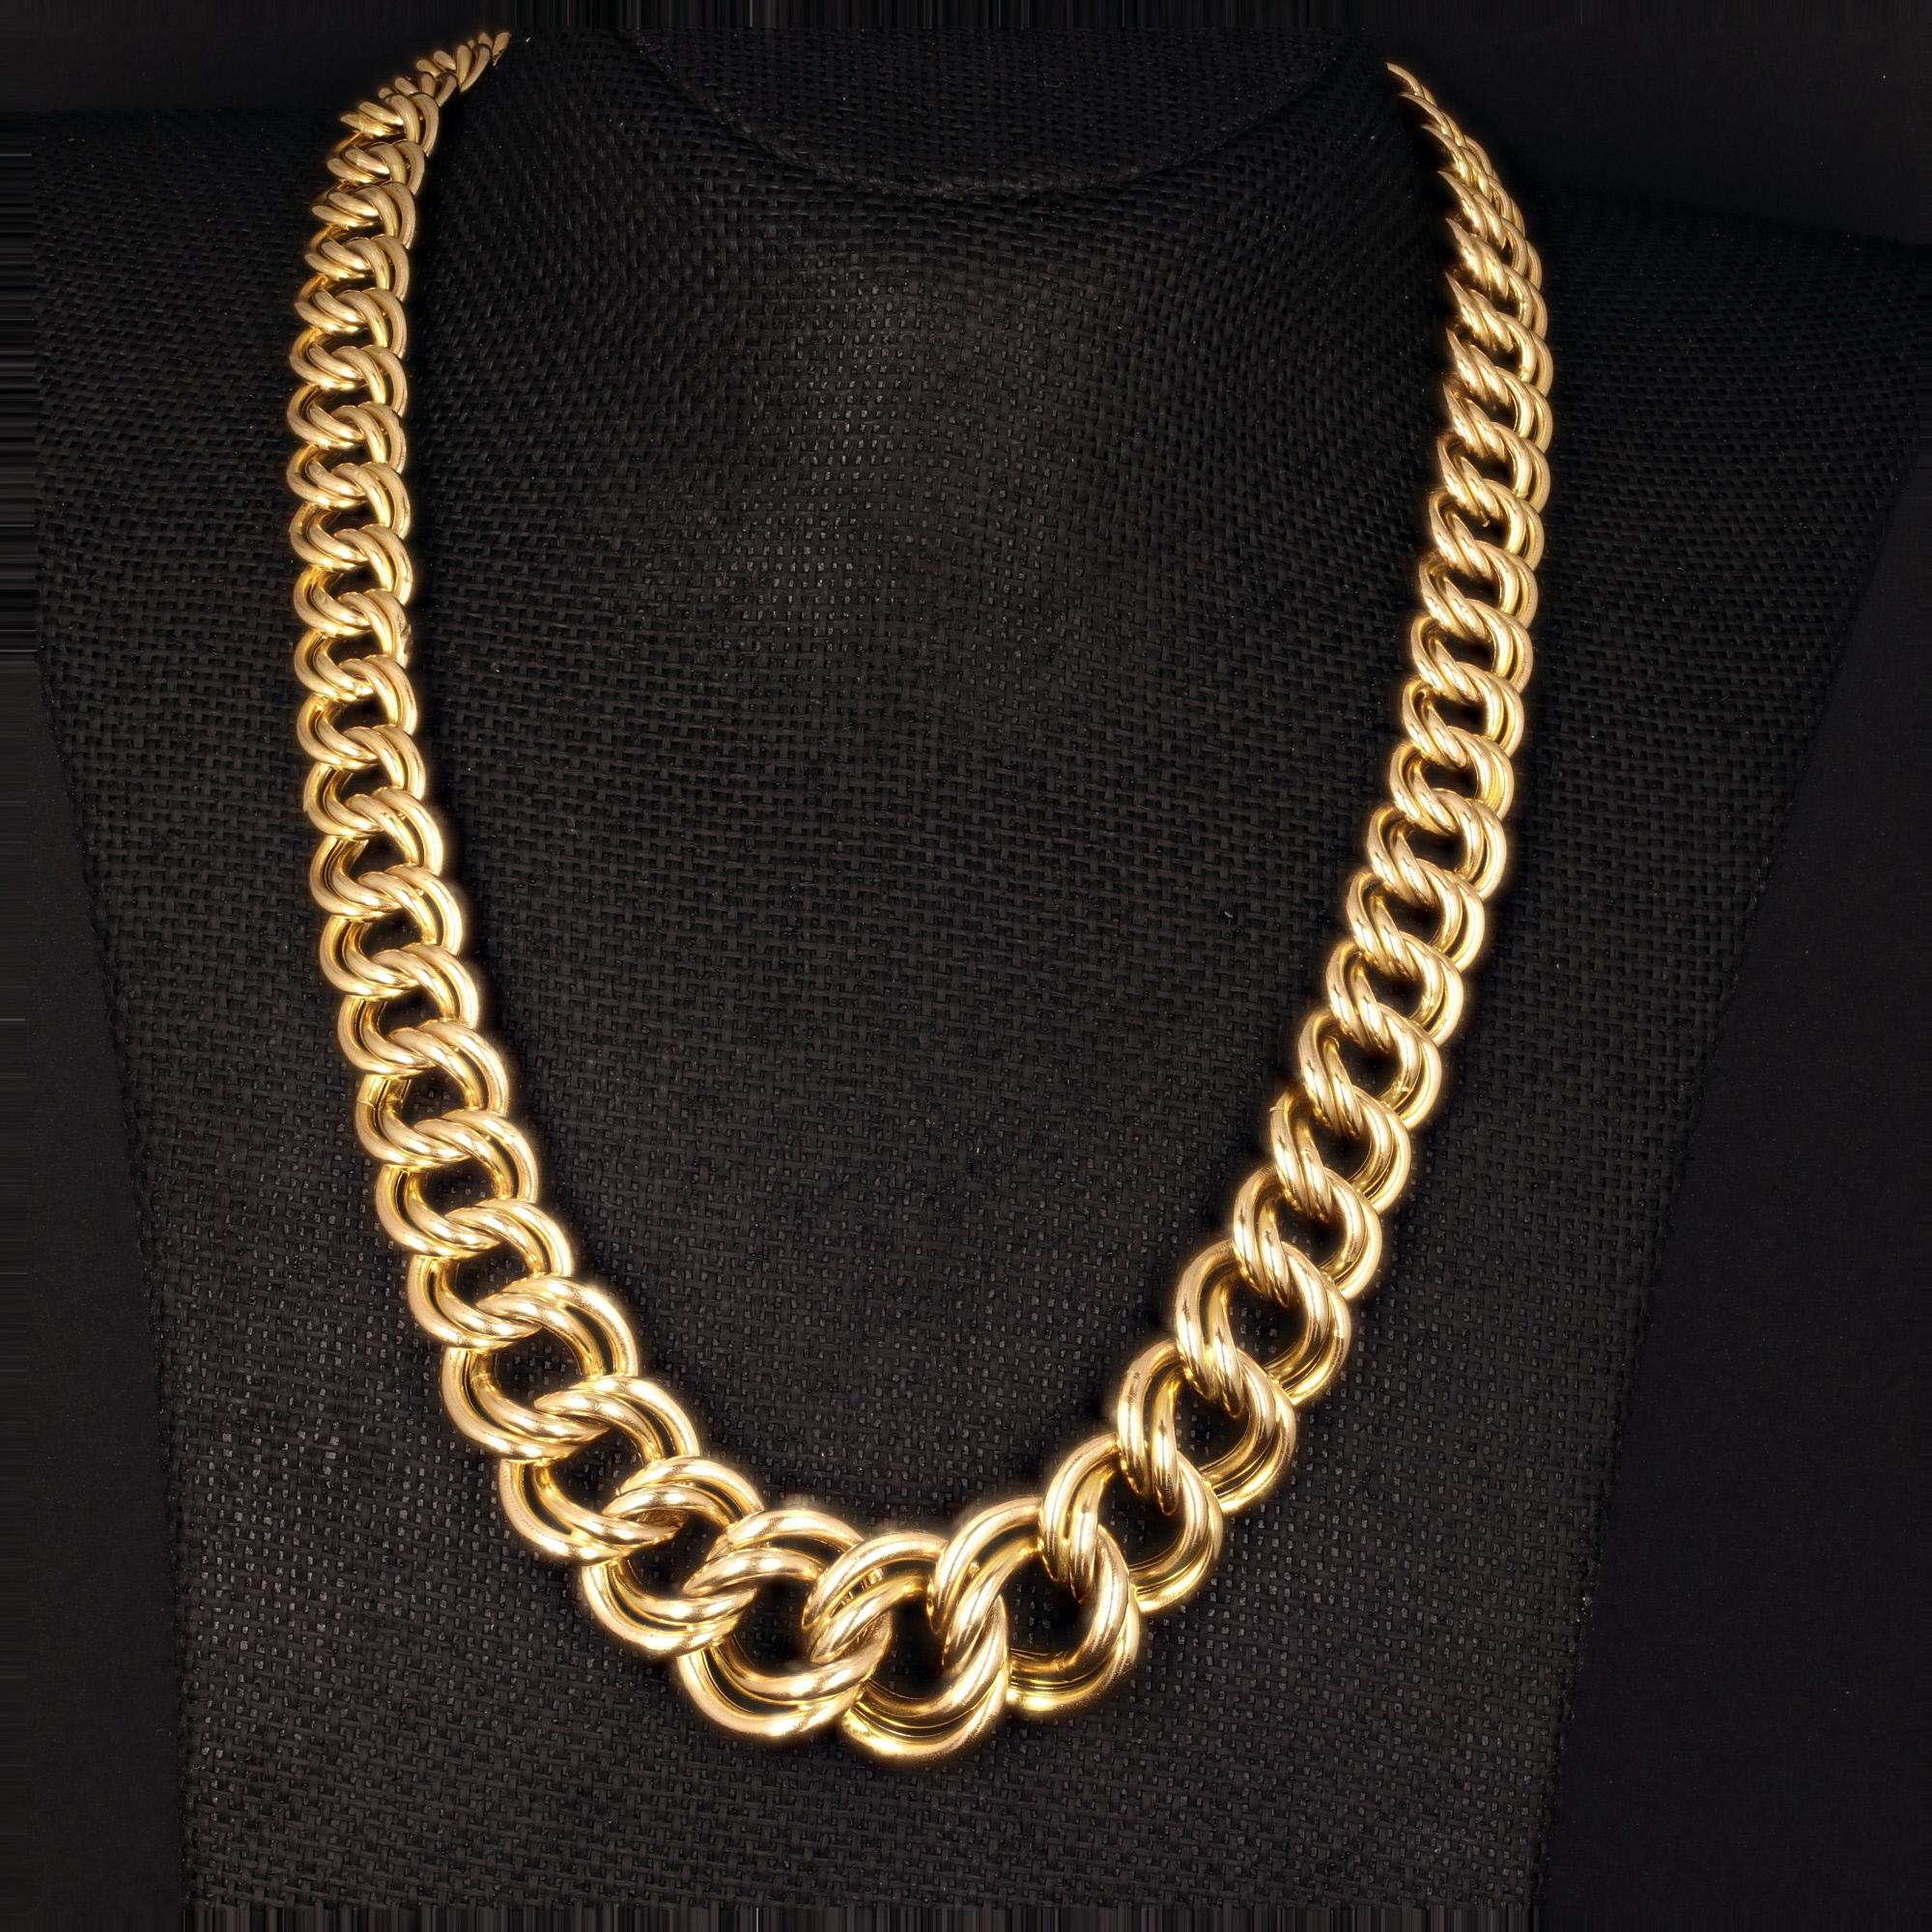 Offered by Alex & Co a refined Italian made double open oval link necklace. This chunky statement piece is crafted in 14 karat yellow gold and measures 21mm at its widest point at the center and tapers to 12mm. This very flexible piece is high